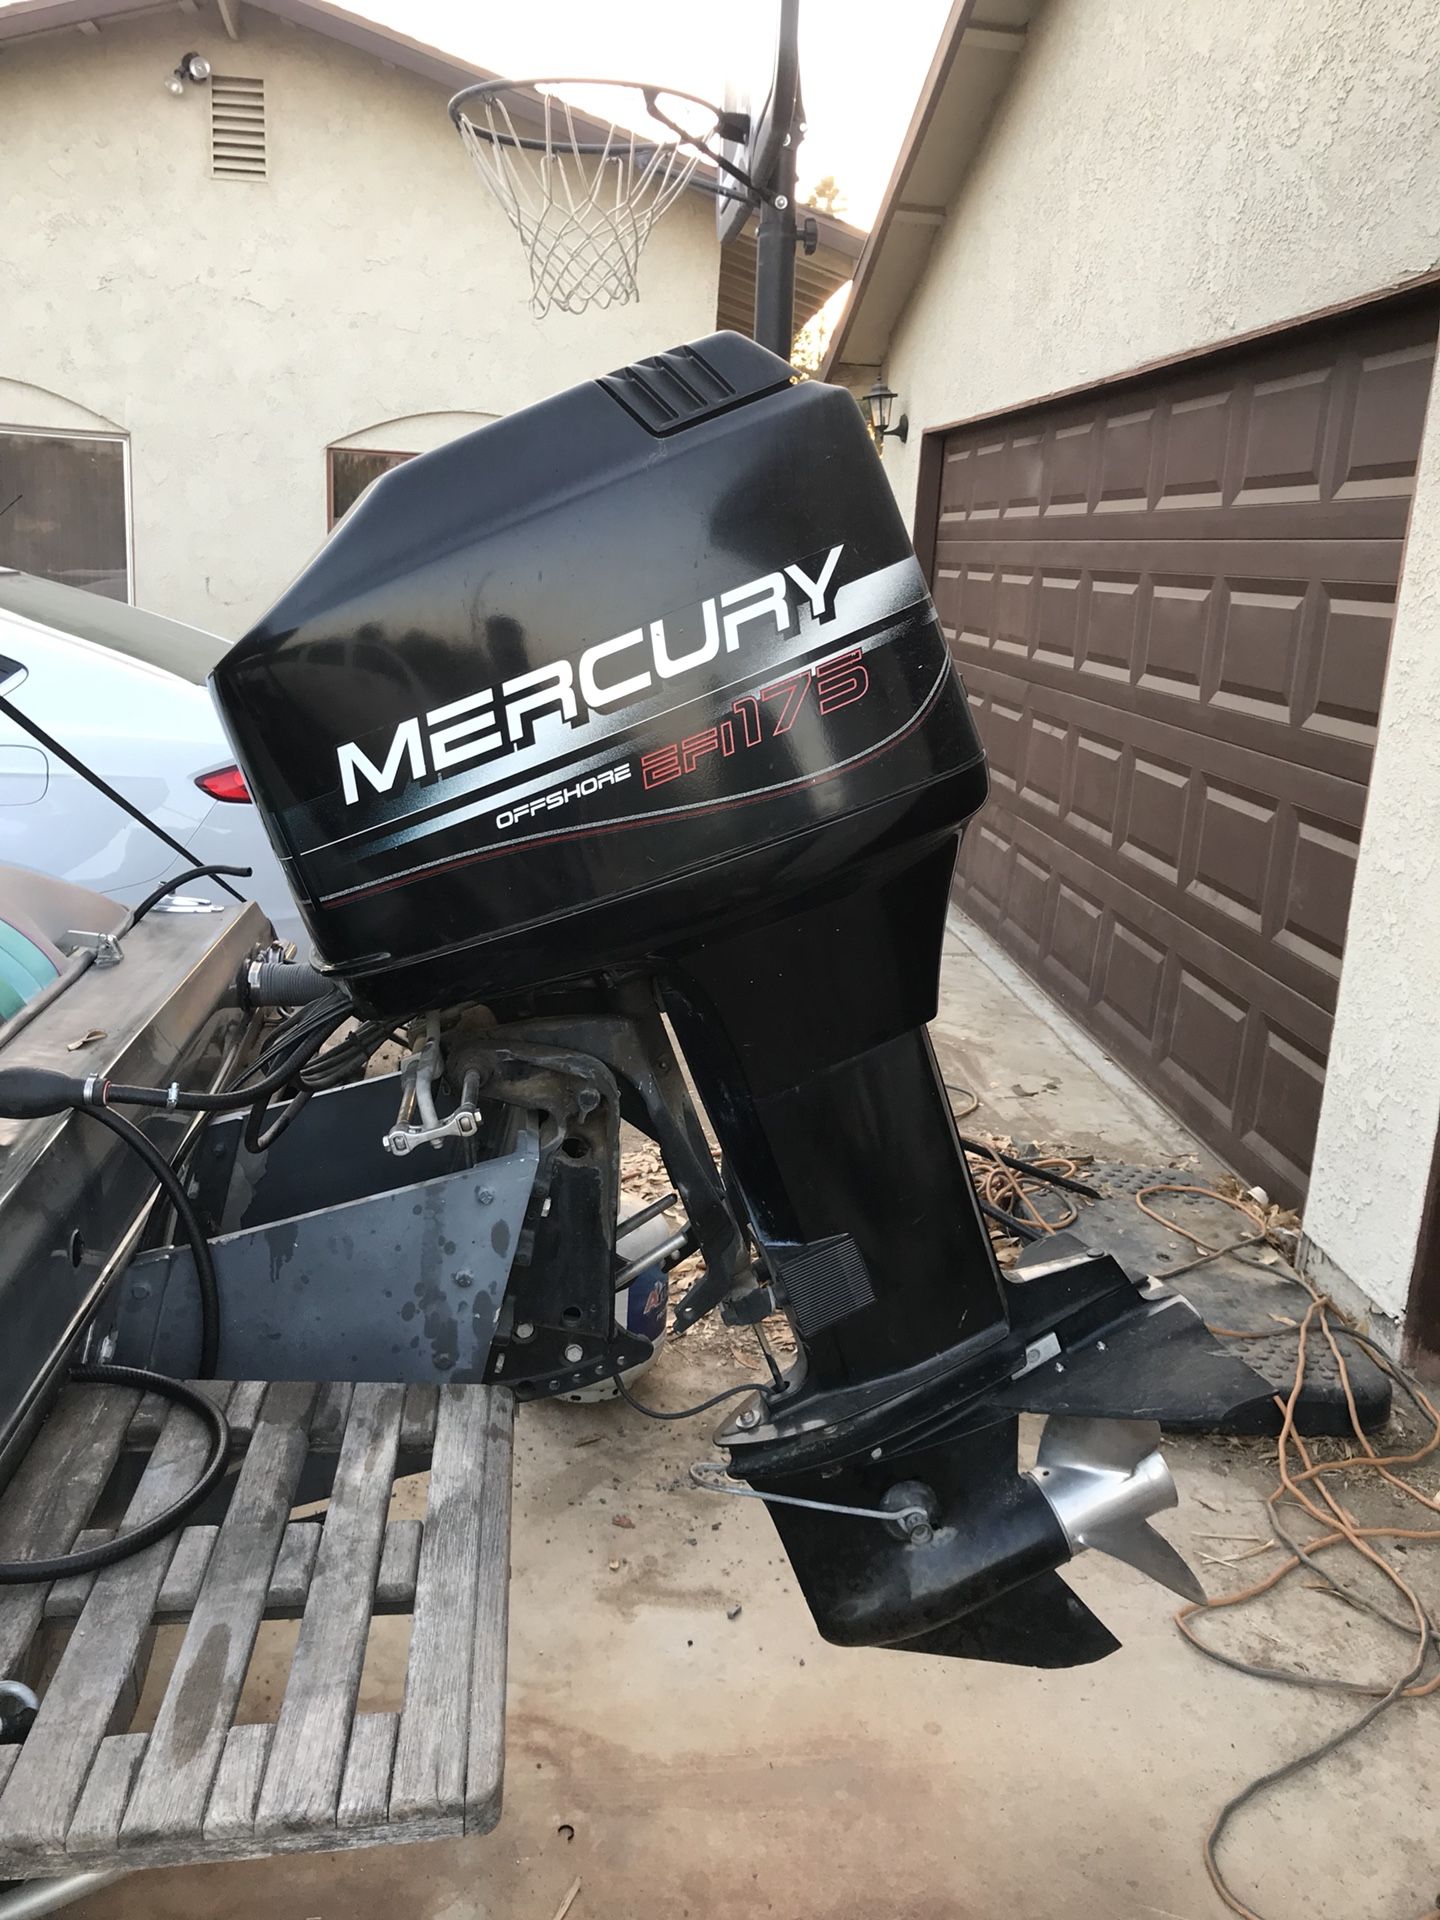 Mercury 175 hp offshore outboard motor